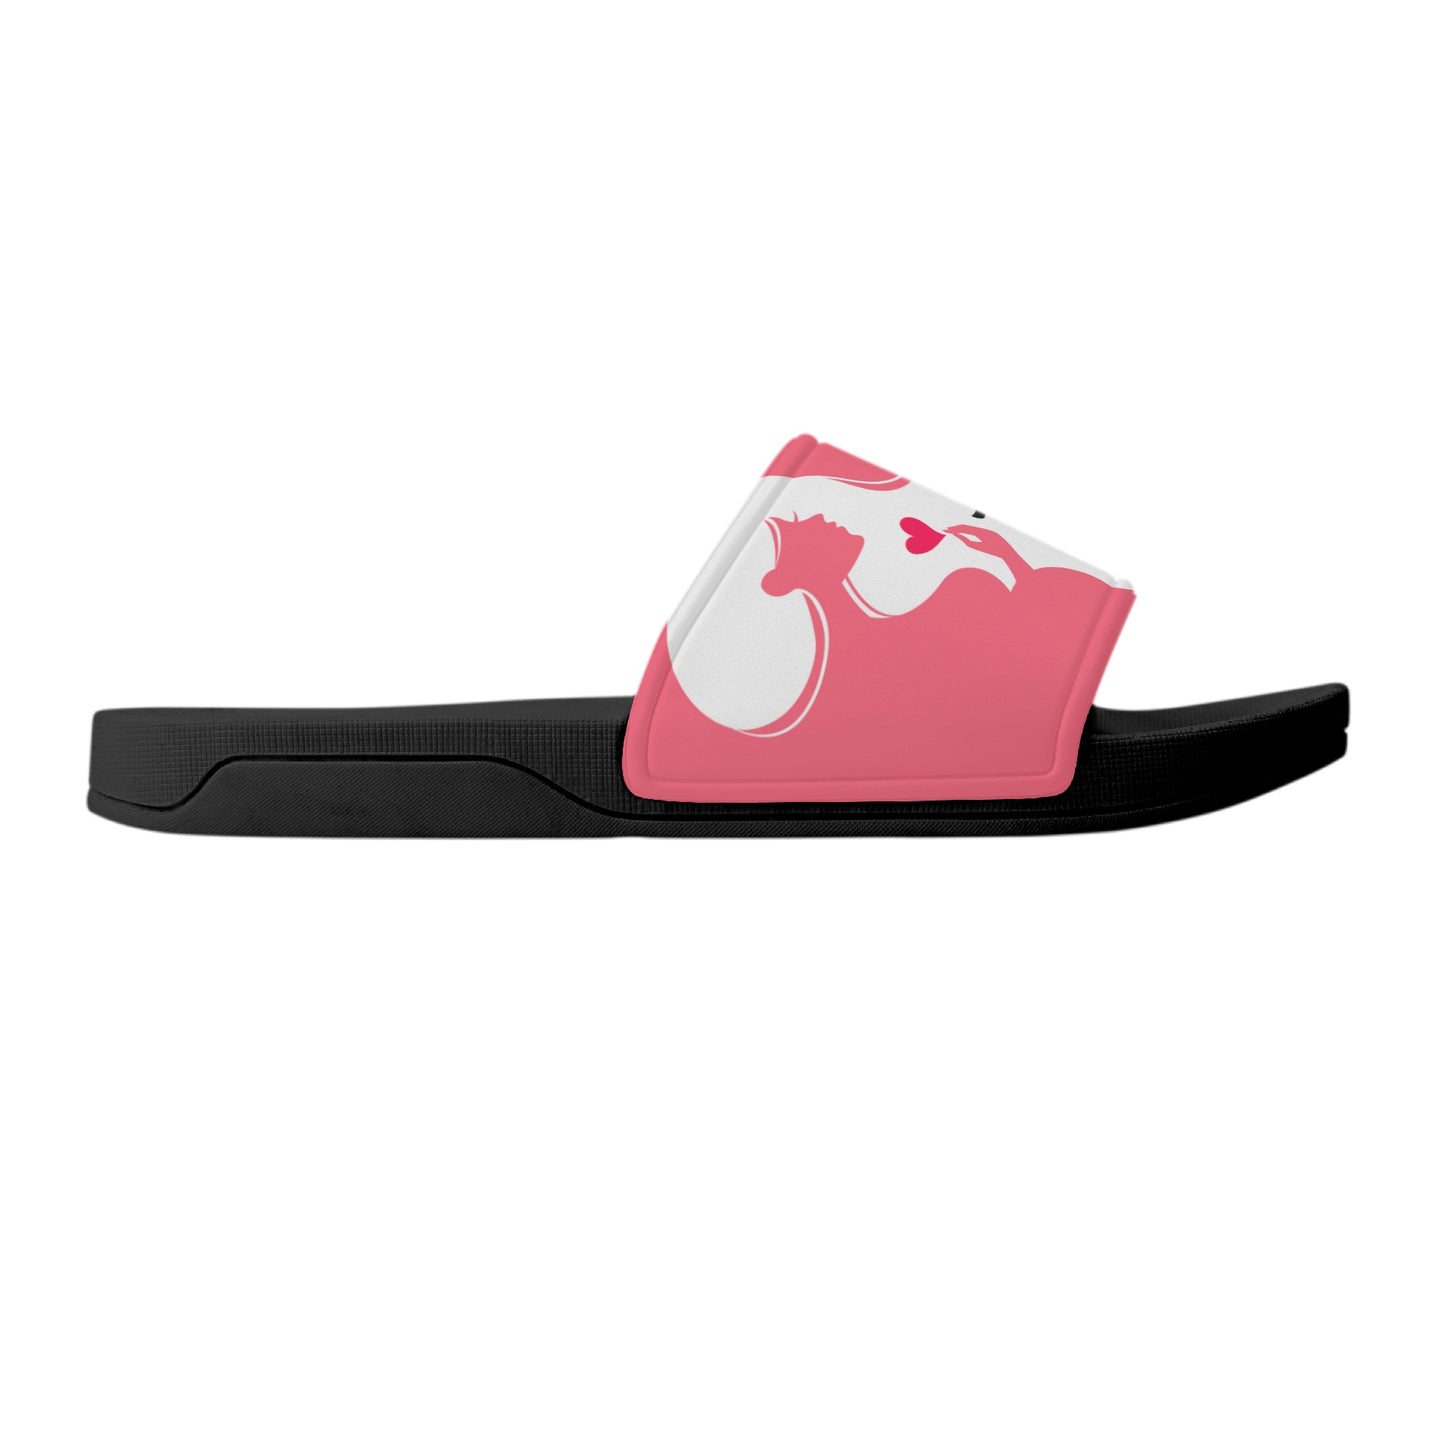 For the Comfort of a Slipper Give Mom A Gift of Love With These Womens Slide Sandals Shoes